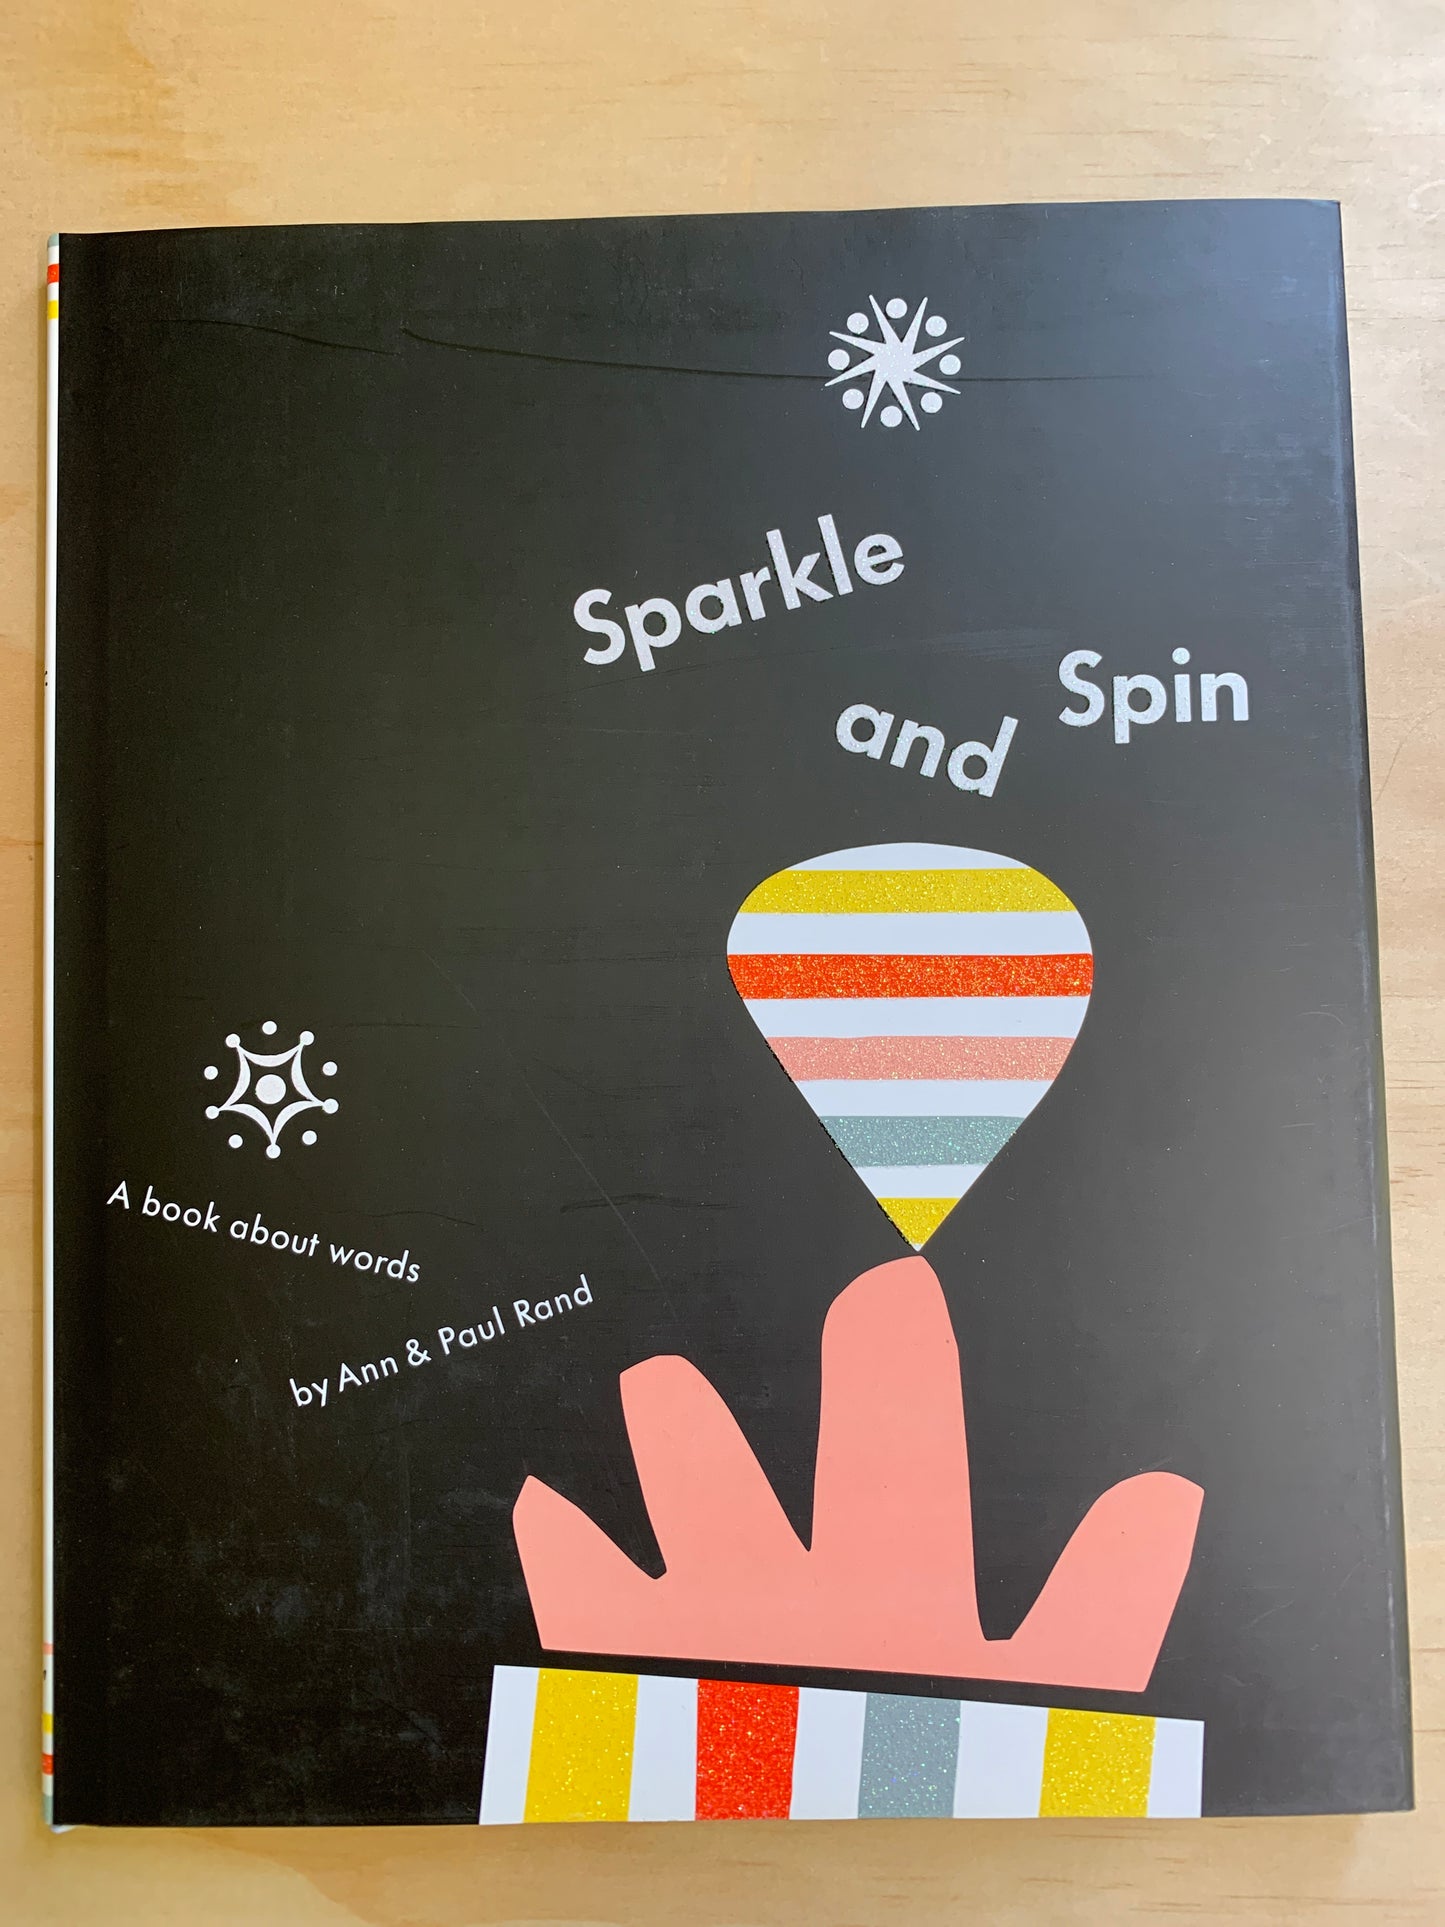 Sparkle and Spin